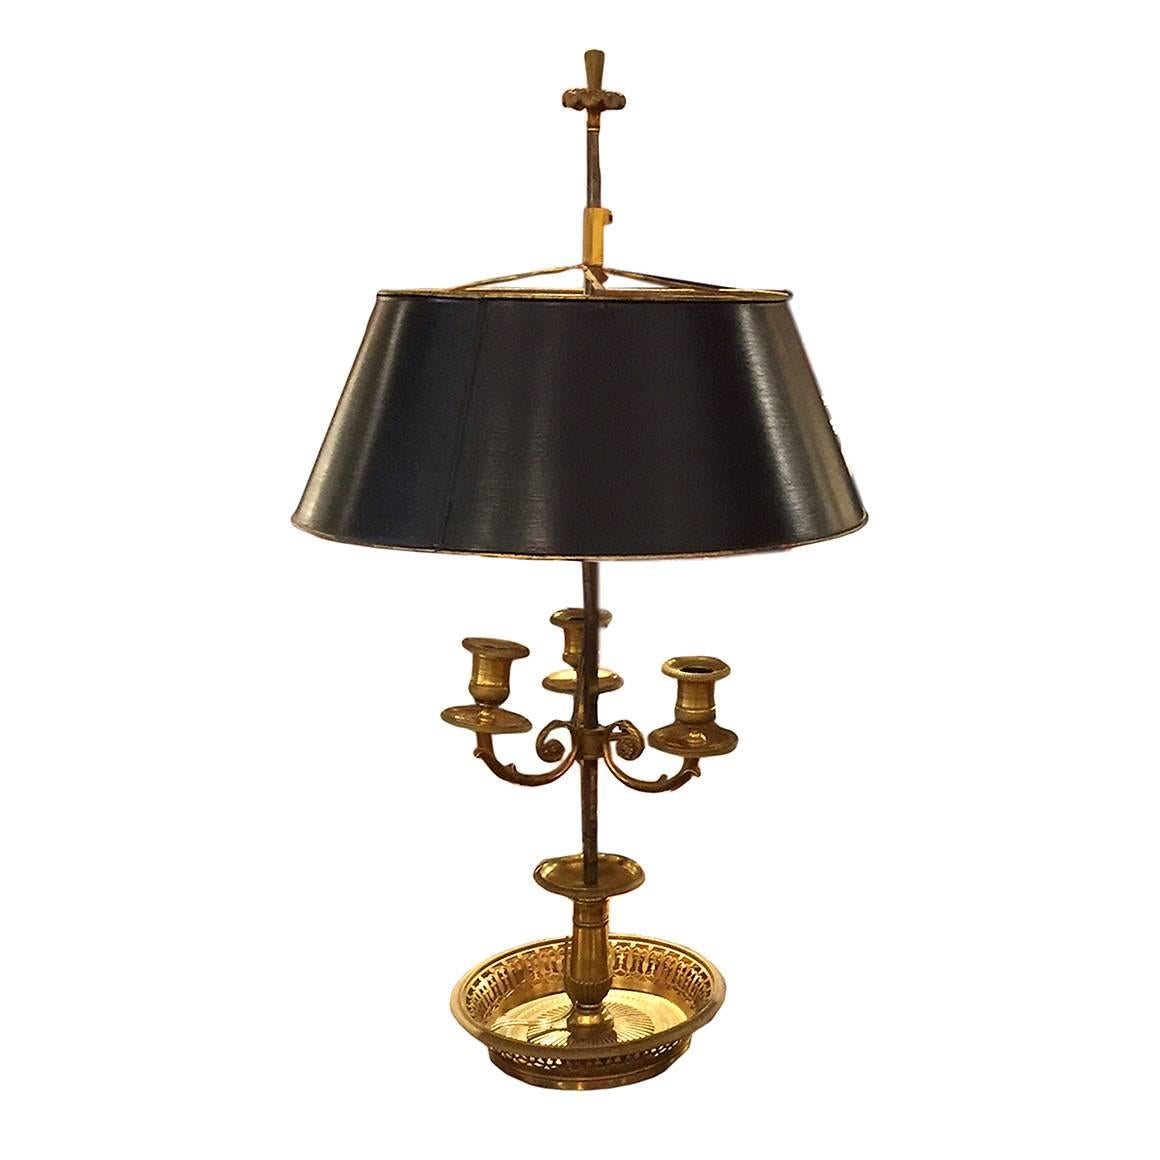 French Bouillotte Lamp with a Dark Green Tole Shade, Electrified